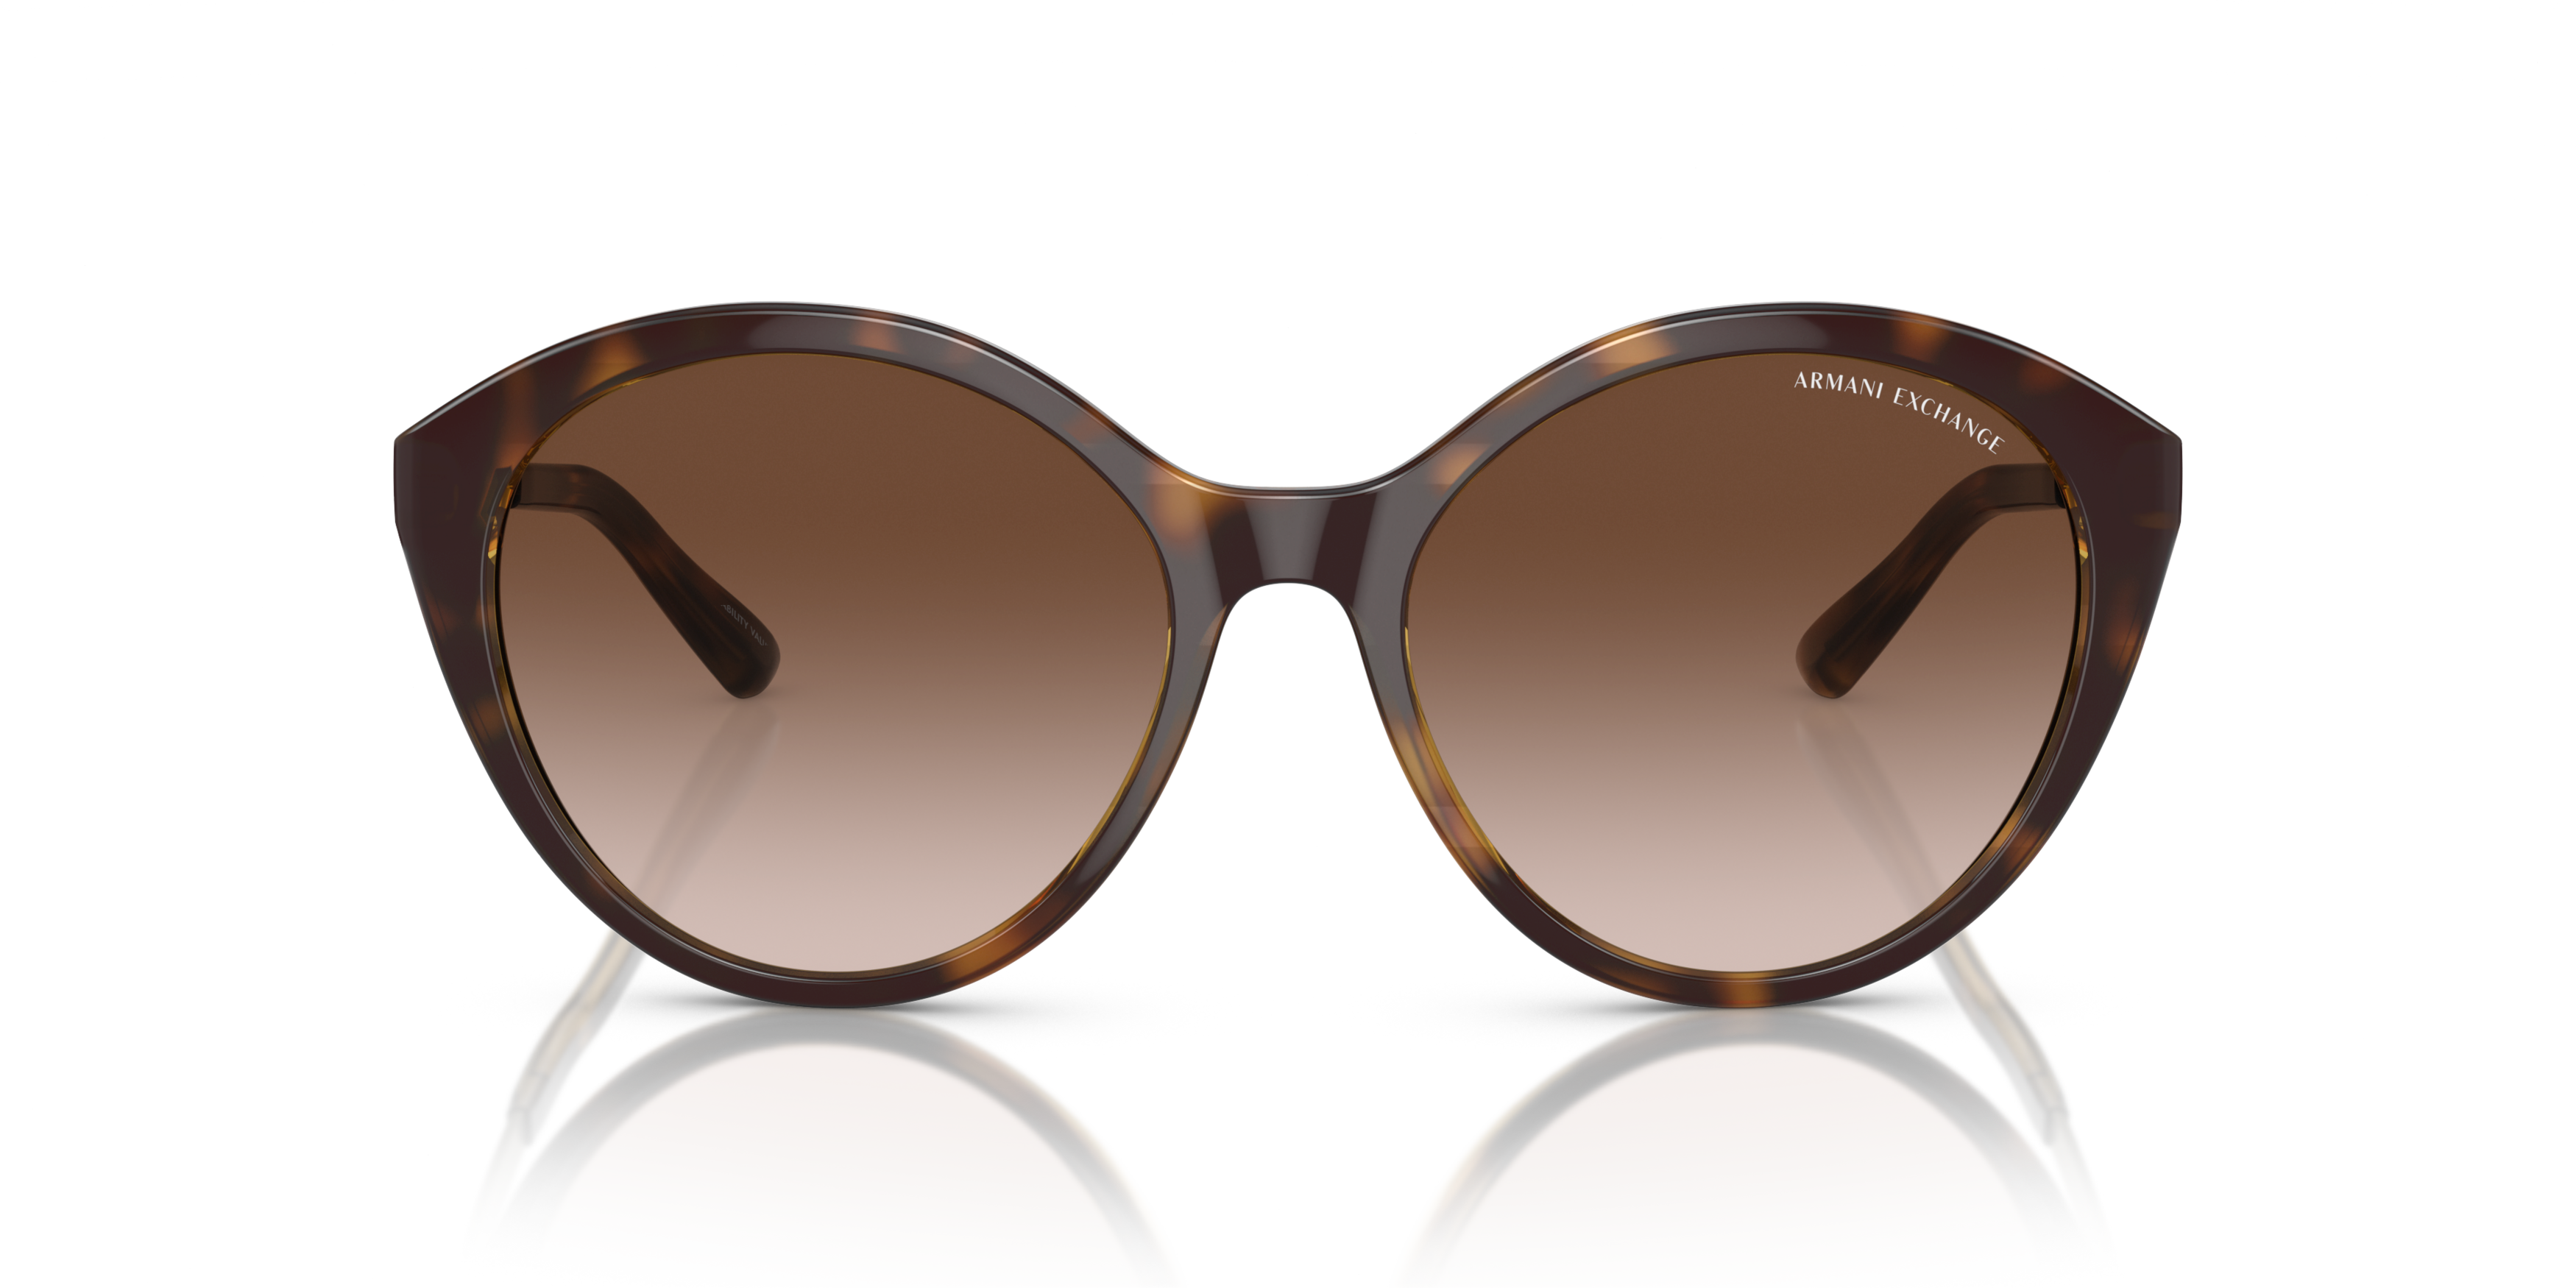 [products.image.front] Armani Exchange AX 4134S Sunglasses